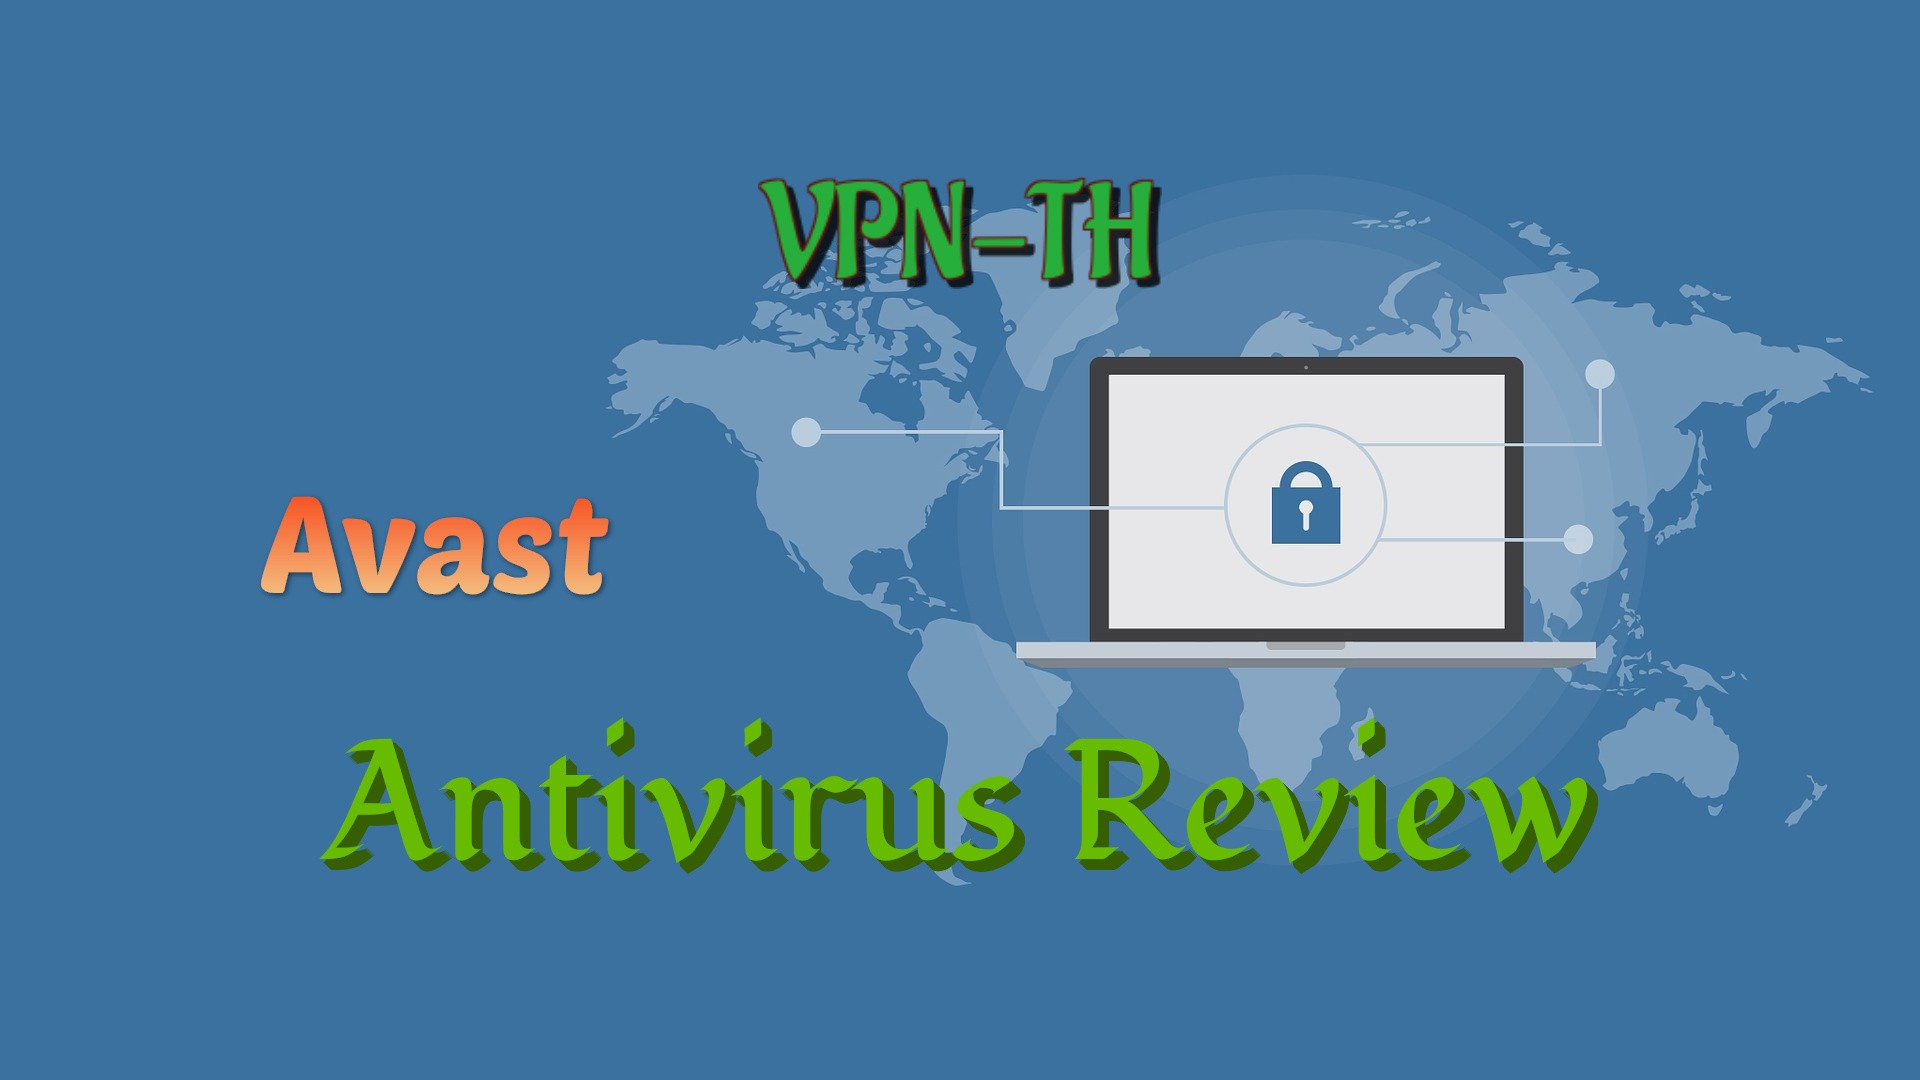 Avast Antivirus Review Features and Tests